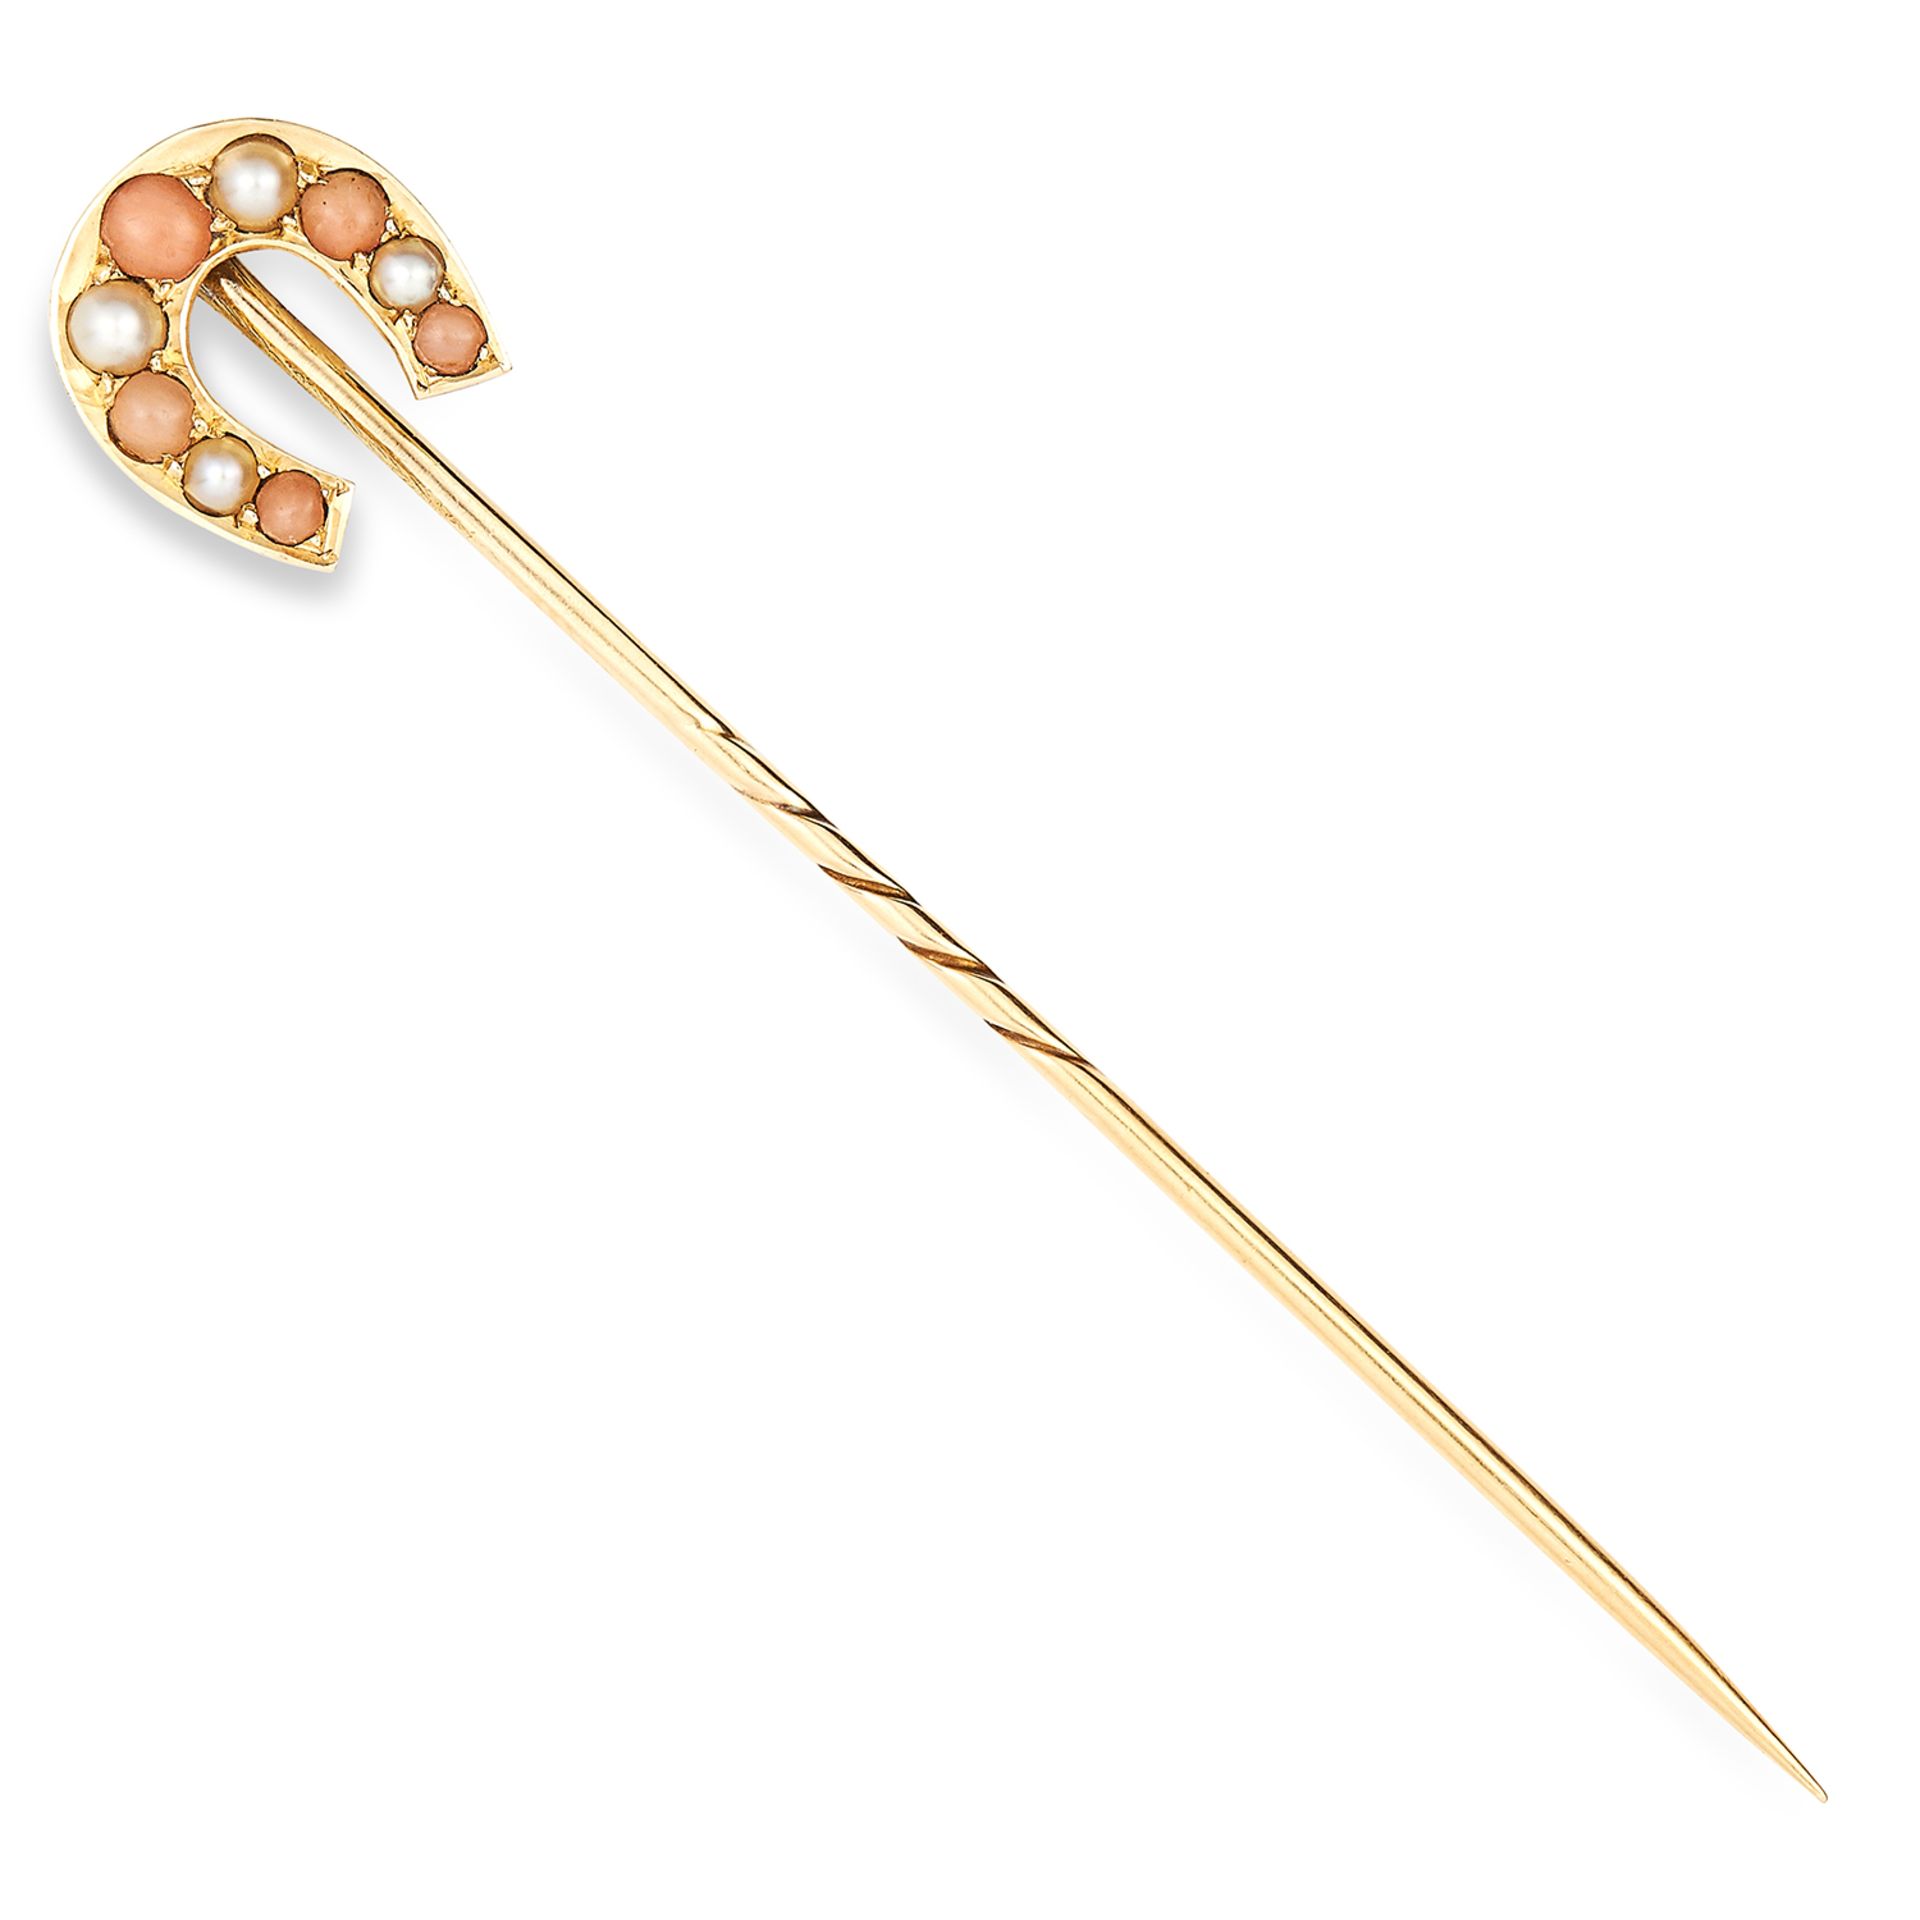 ANTIQUE CORAL AND PEARL HORSE SHOE STICK PIN set with cabochon coral and seed pearls, 6cm, 1.8g.